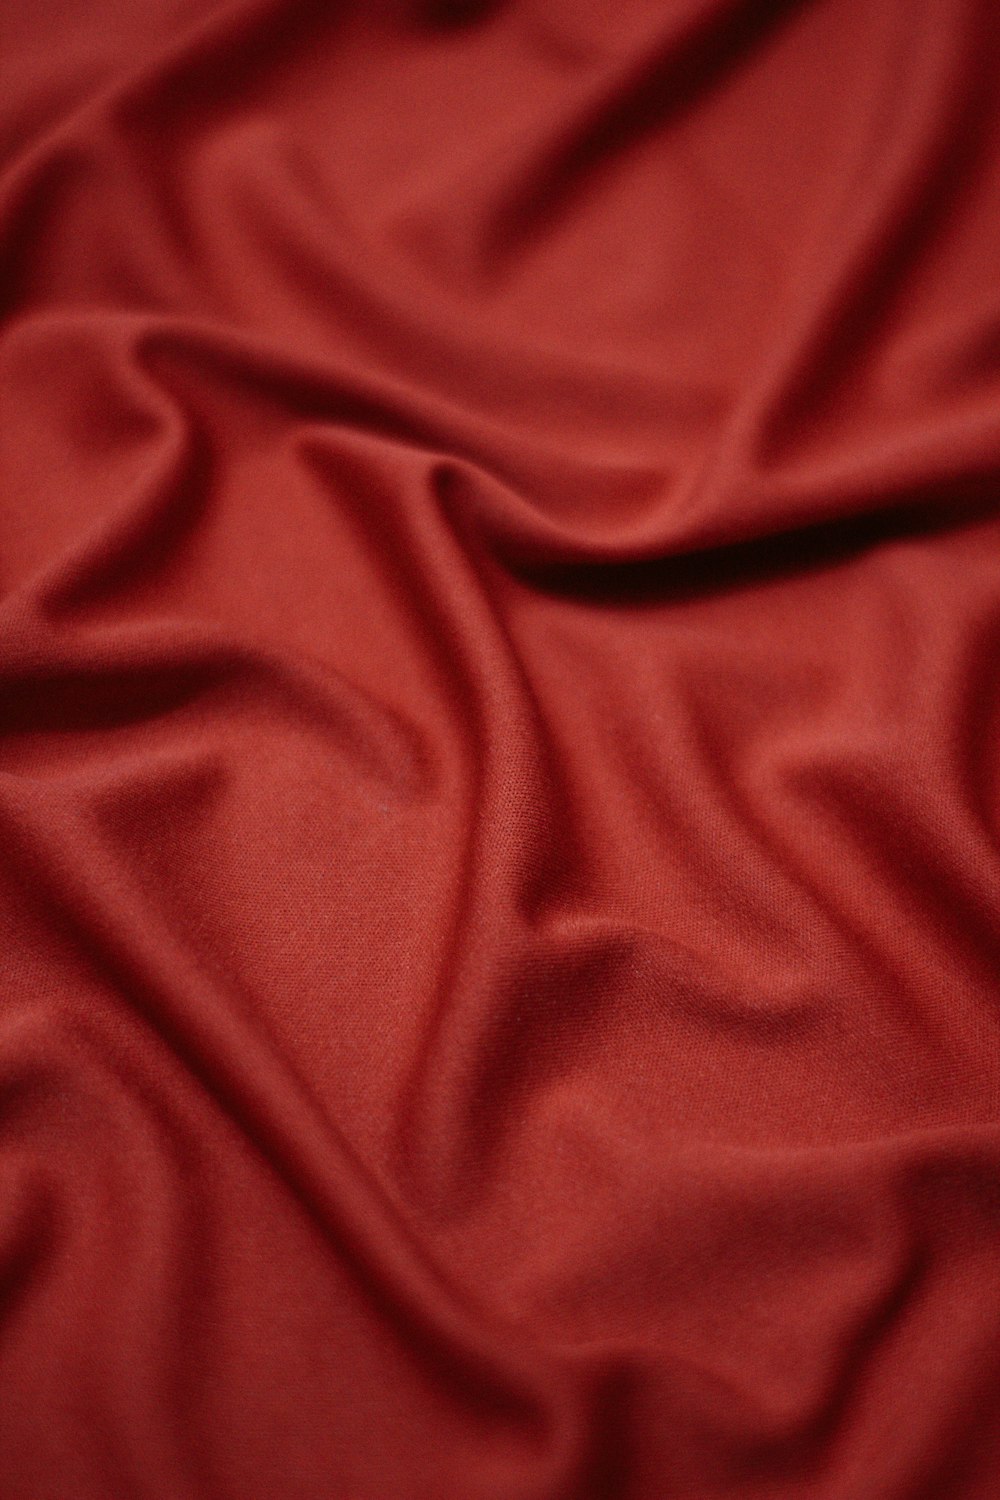 Silk Fabric Satin Texture Background, Silk, Cloth, Satin Background Image  And Wallpaper for Free Download